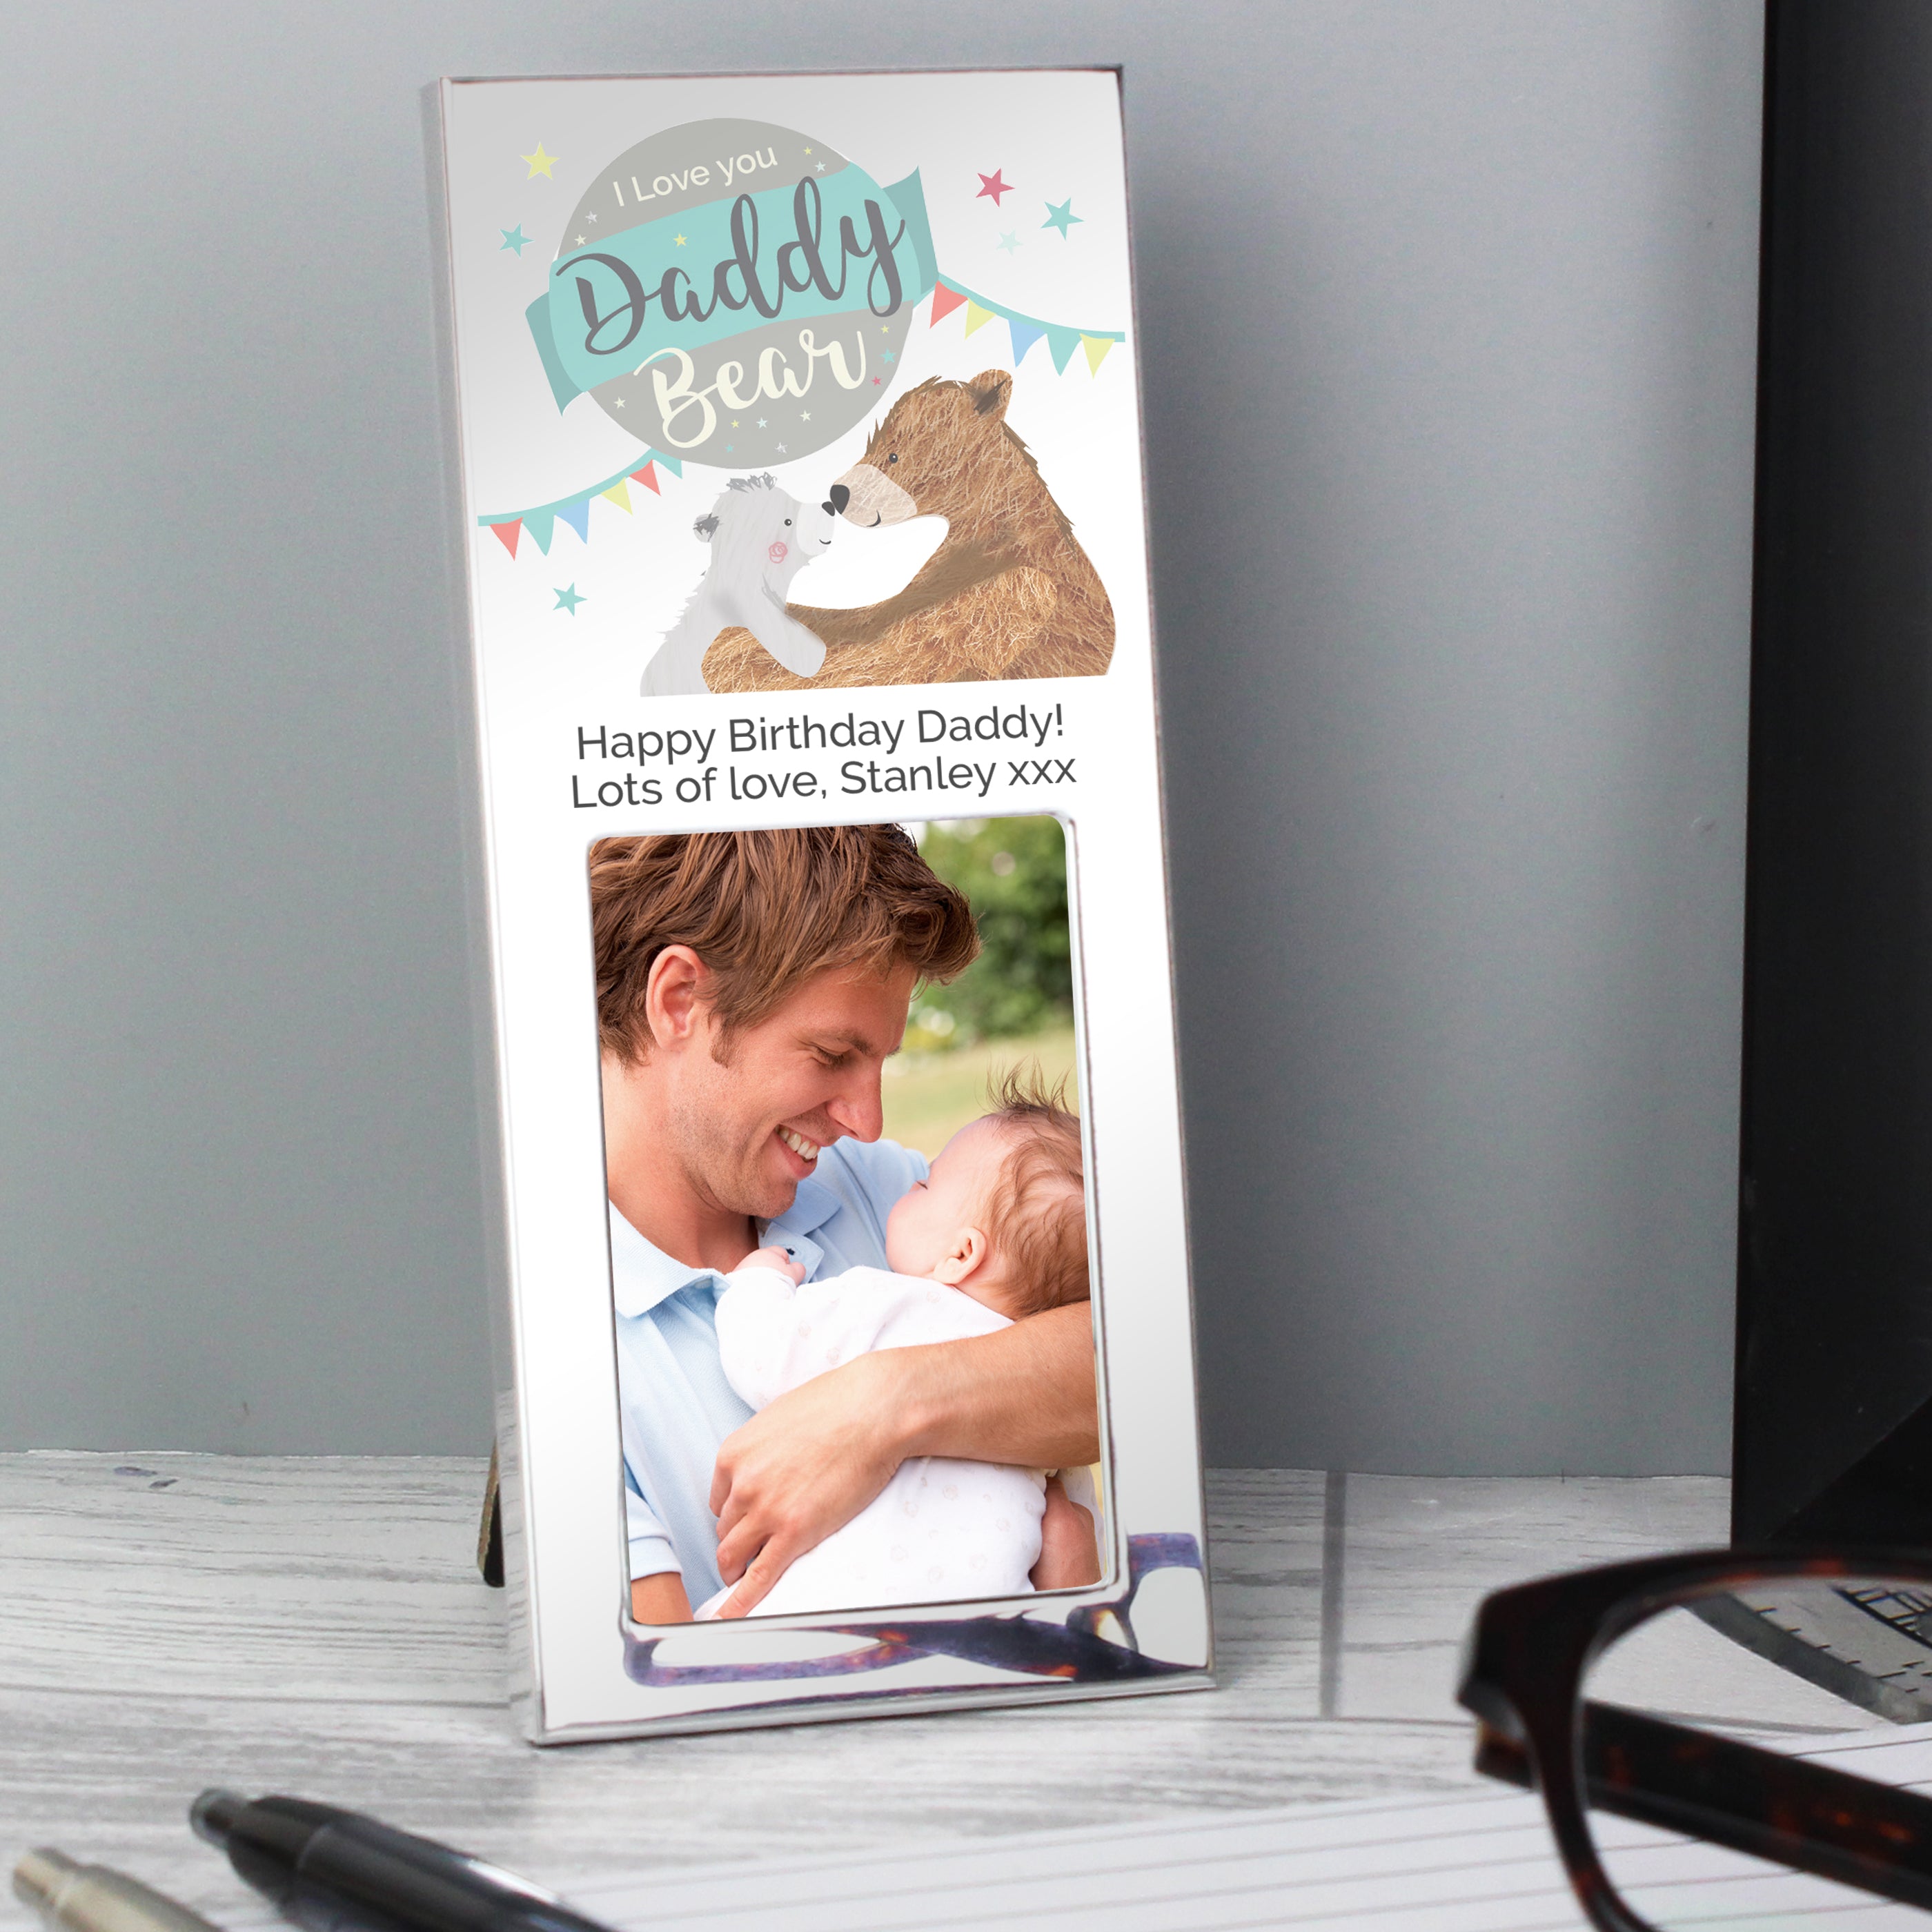 Personalised Daddy Bear 2x3 Photo Frame